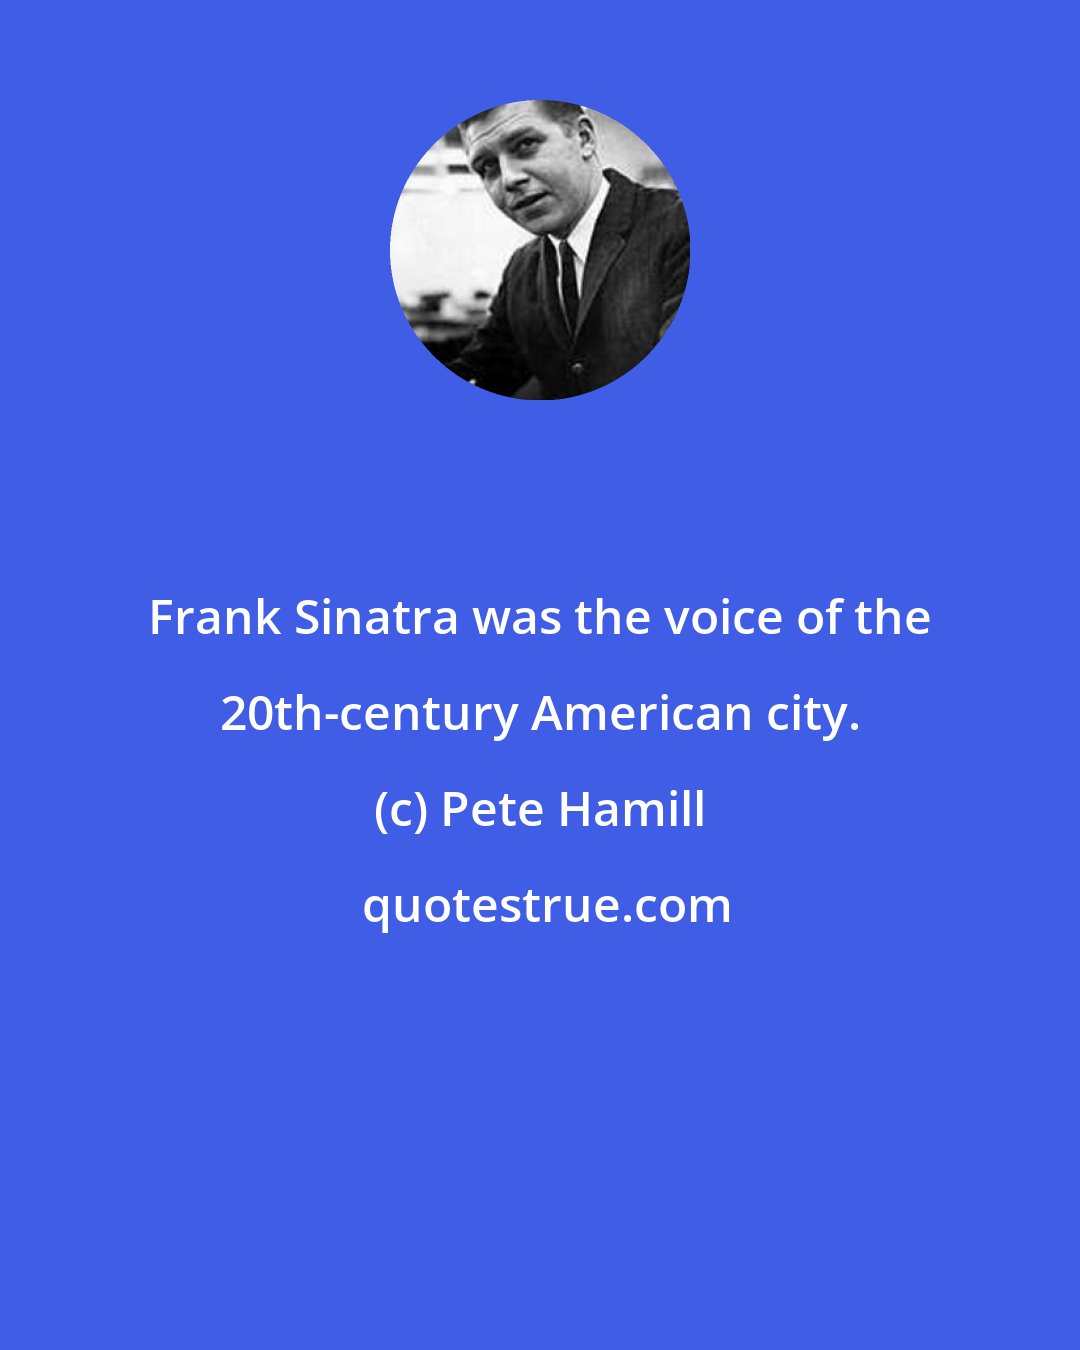 Pete Hamill: Frank Sinatra was the voice of the 20th-century American city.